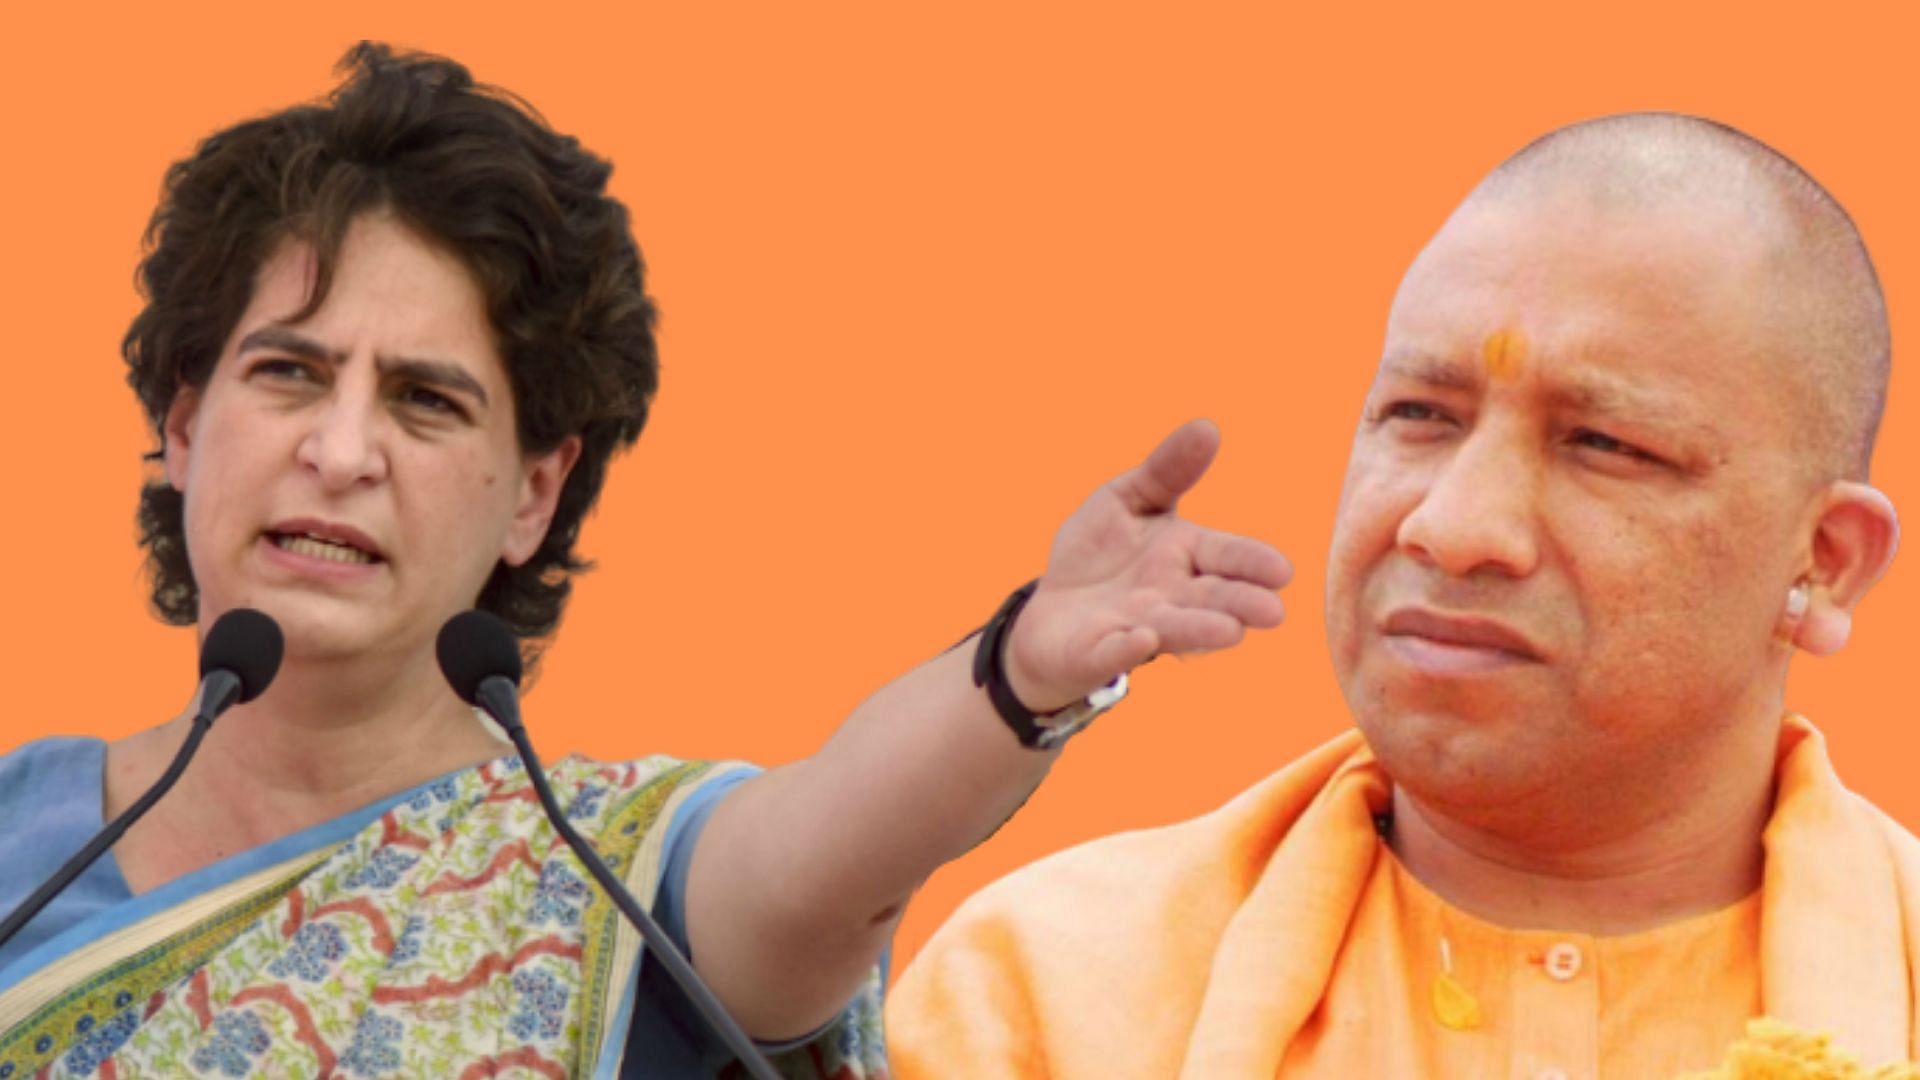 Congress General Secretary Priyanka Gandhi slammed the Uttar Pradesh government for its inaction and asked why the victim was not given immediate protection.